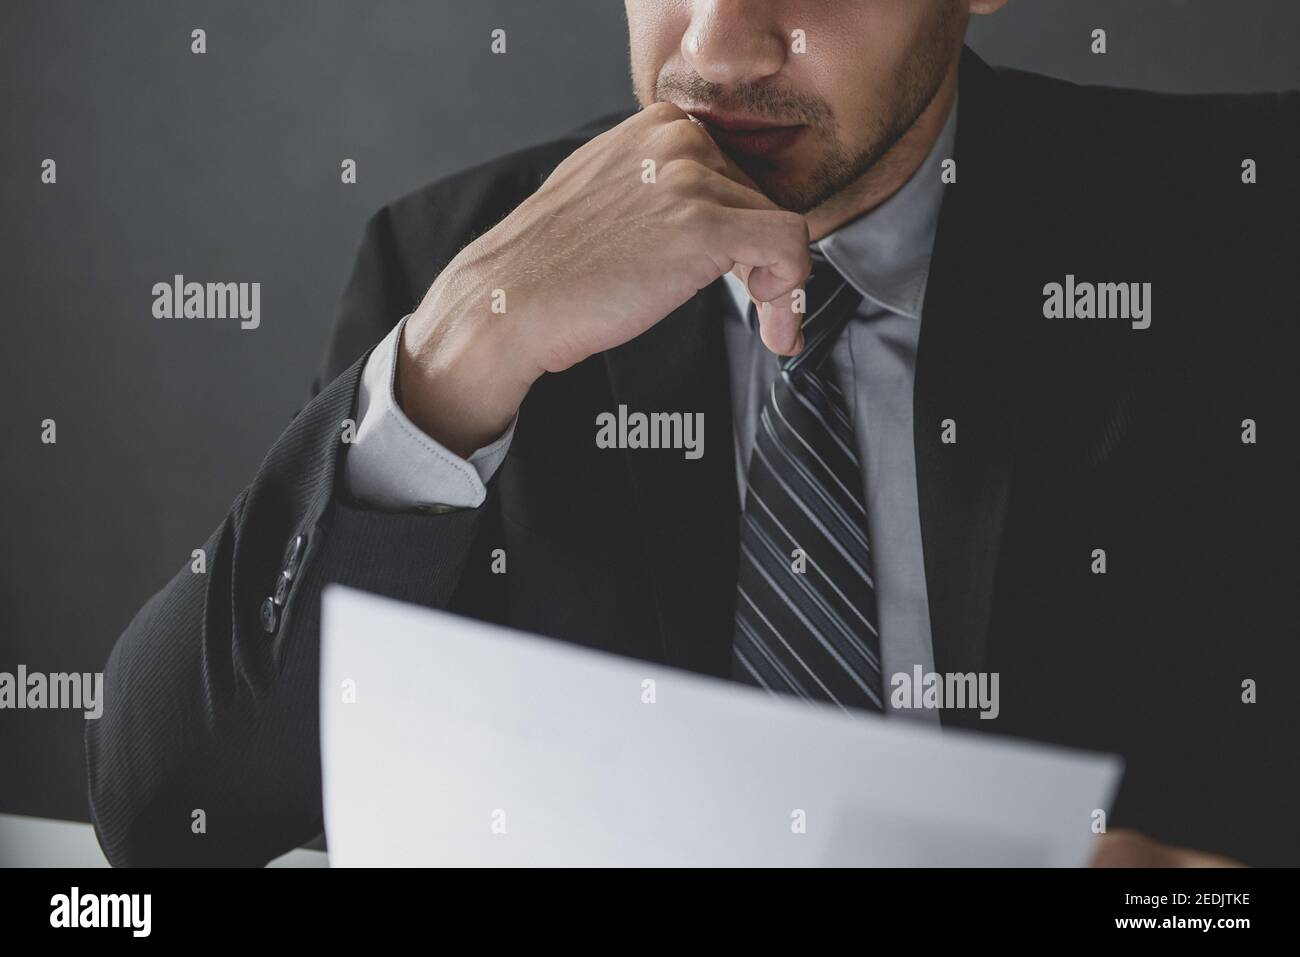 Serious businessman with hand on chin reading document and pondering Stock Photo